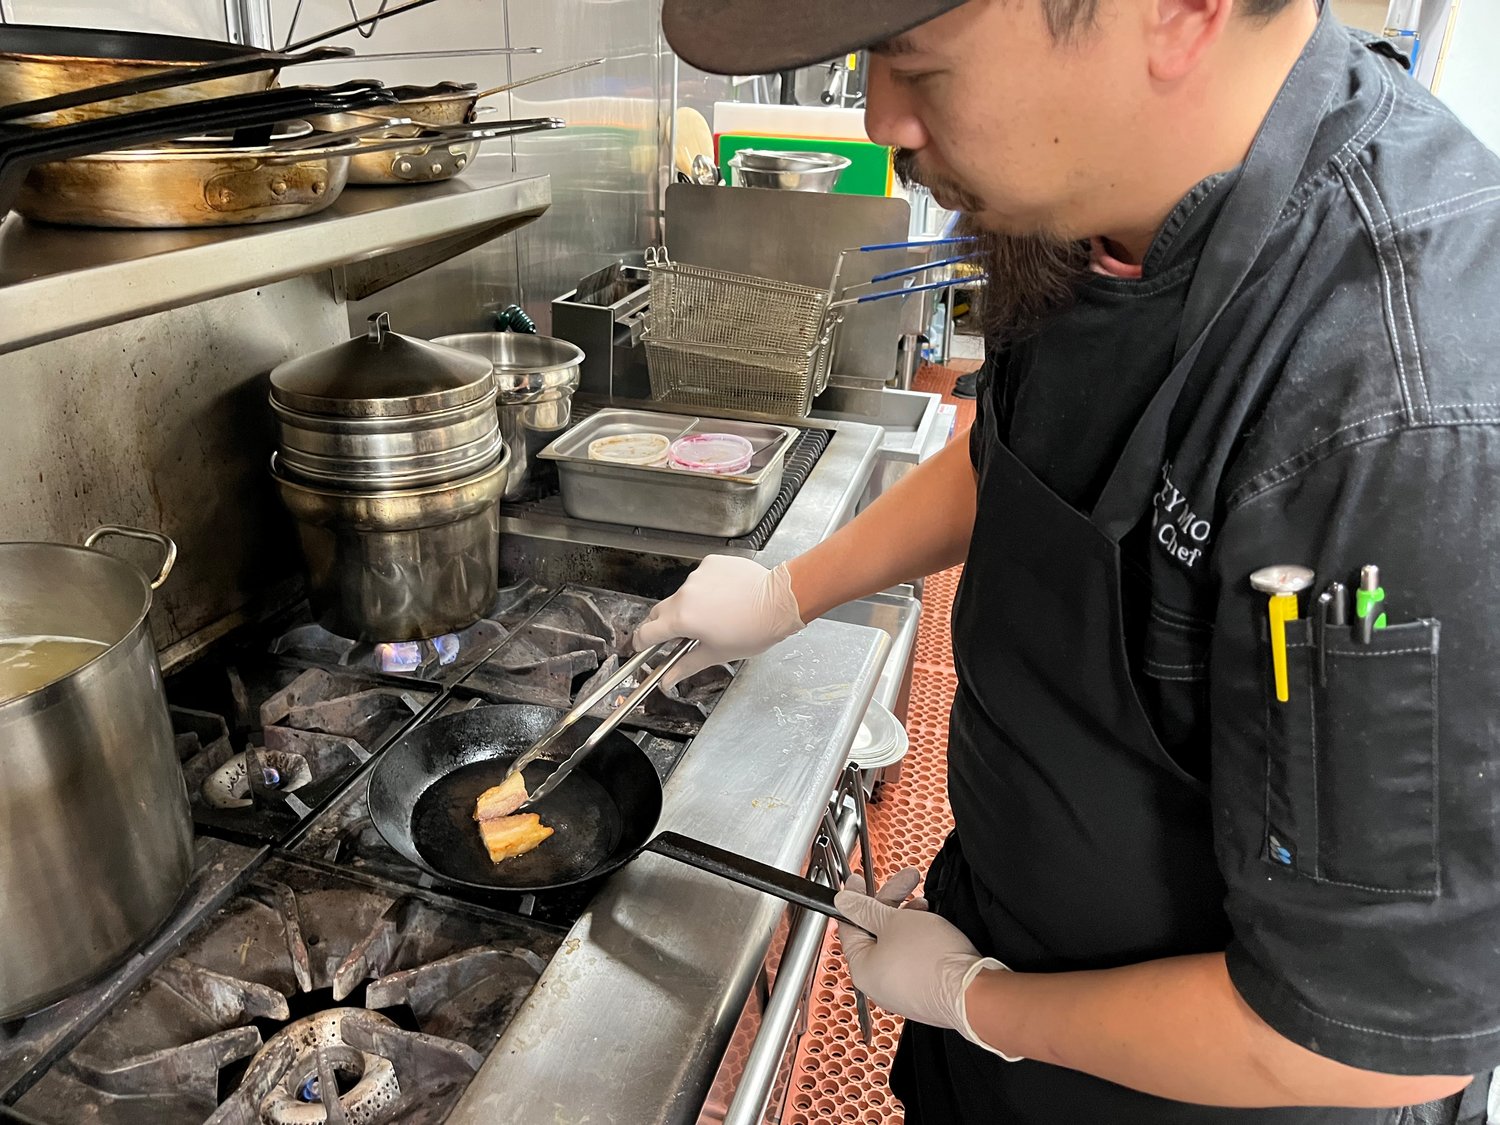 Executive Chef Charley Moi has worked to perfect Asian and French cuisine, Southern and Asian-style BBQ and numerous other culinary genres.